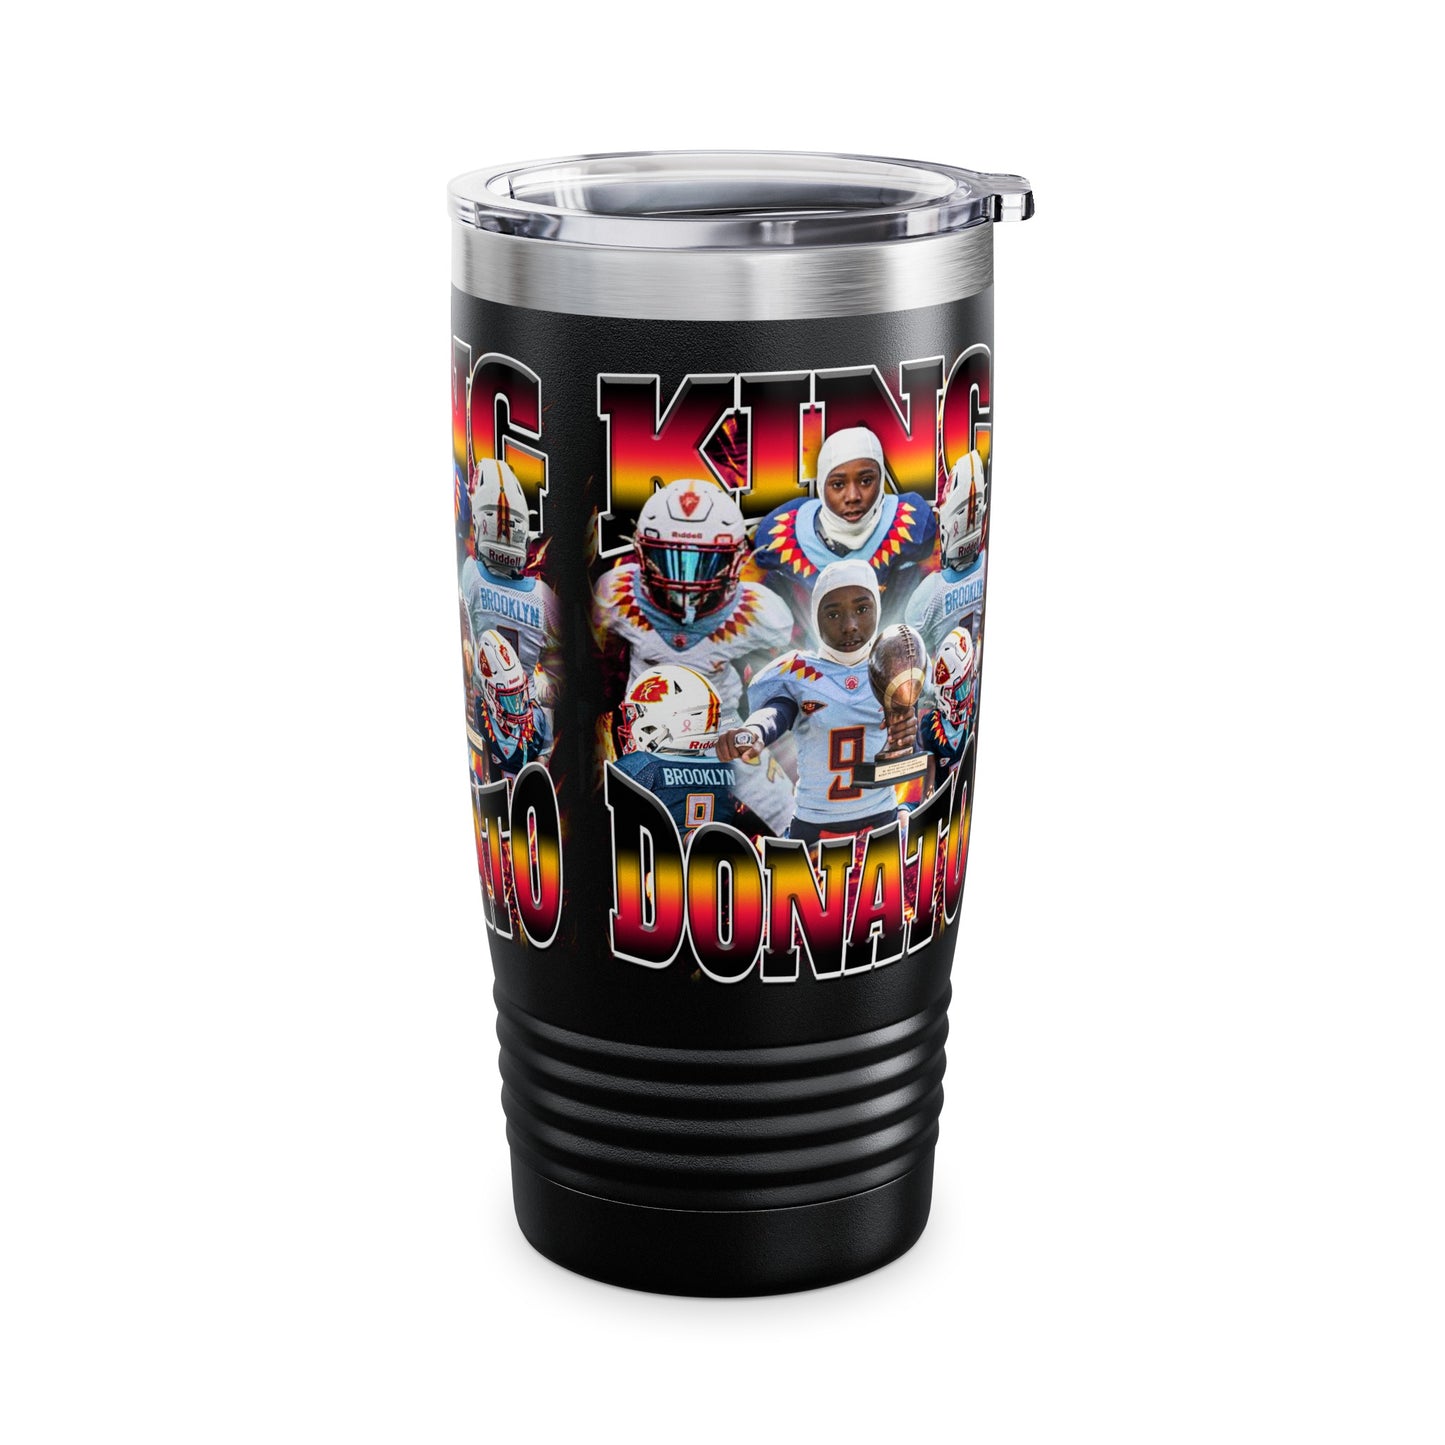 King Donato Stainless Steal Tumbler